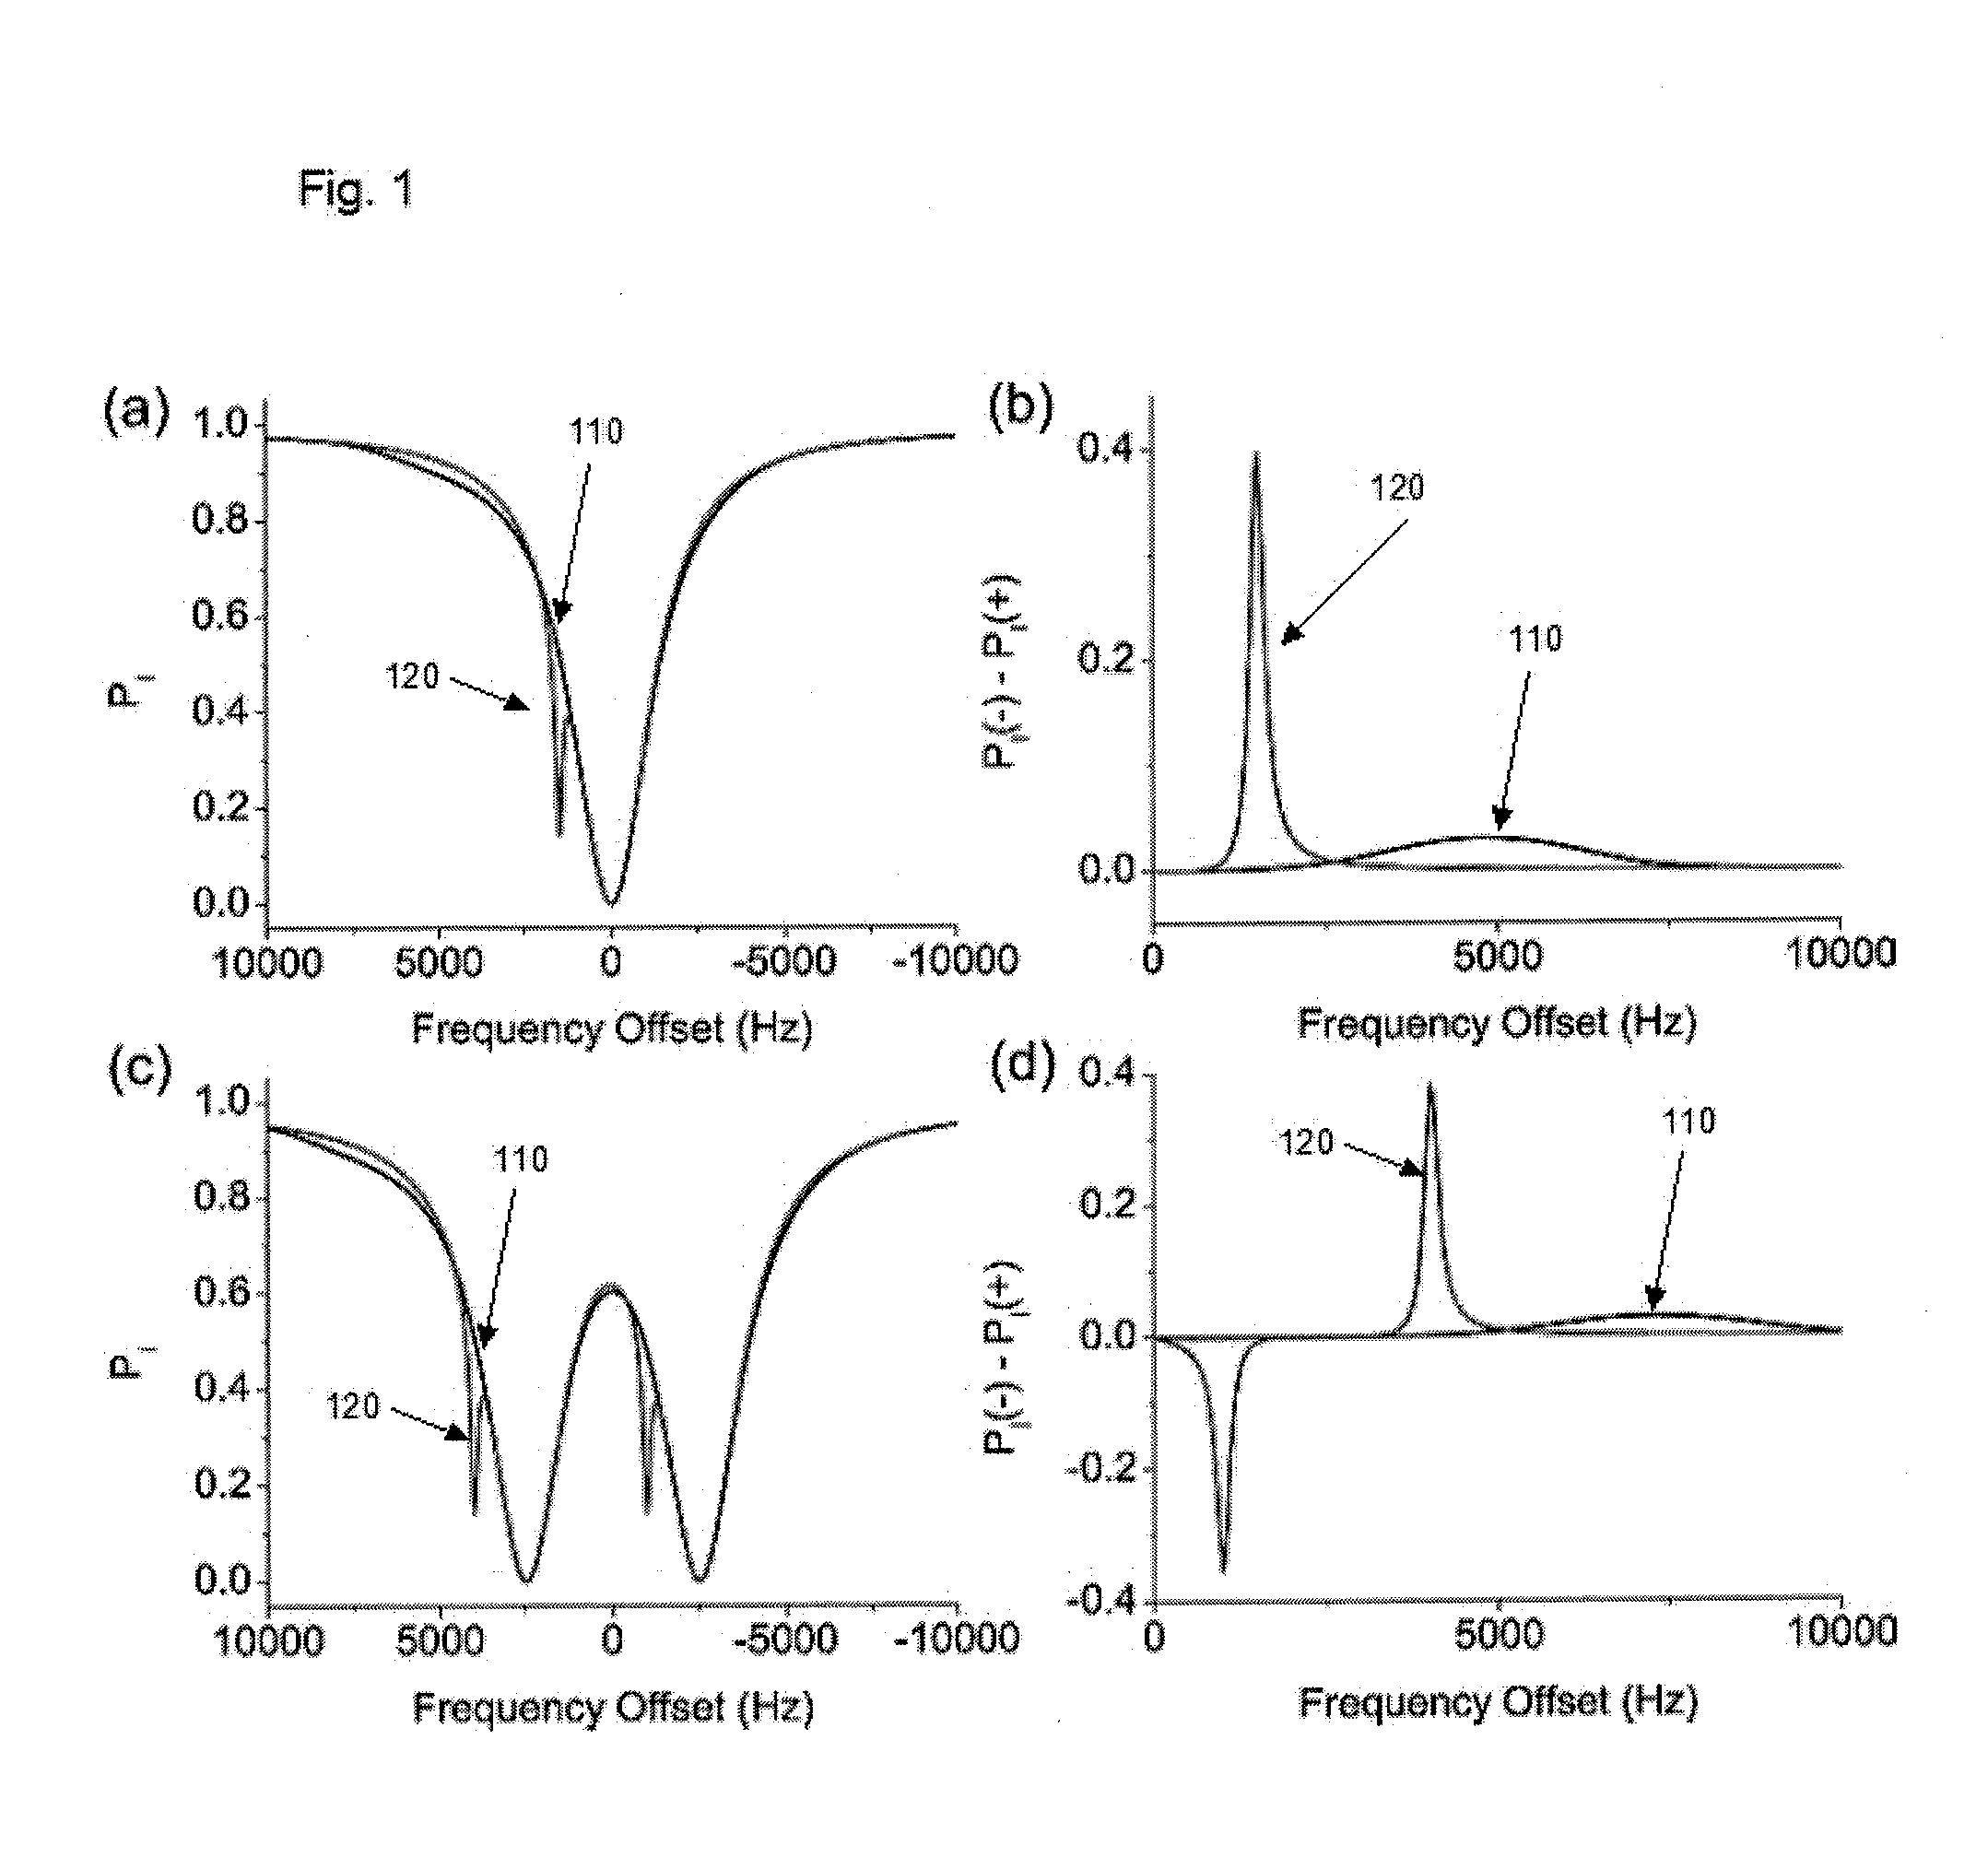 Apparatus, system, method and computer-readable medium for isolating chemical exchange saturation transfer contrast from magnetization transfer asymmetry under two-frequency RF irradiation